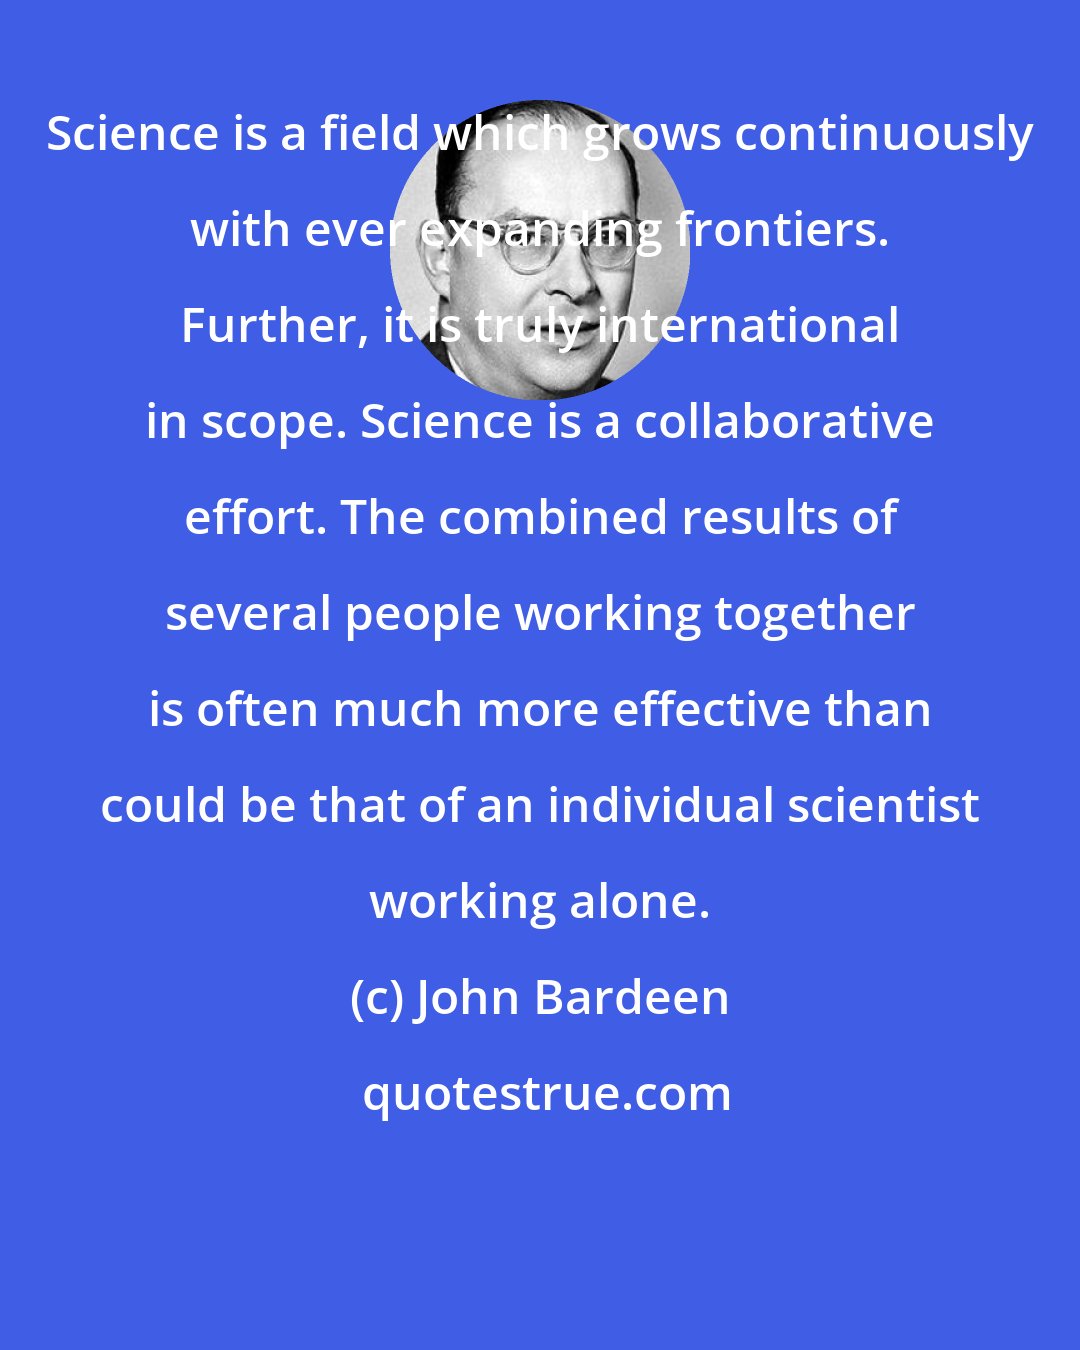 John Bardeen: Science is a field which grows continuously with ever expanding frontiers. Further, it is truly international in scope. Science is a collaborative effort. The combined results of several people working together is often much more effective than could be that of an individual scientist working alone.